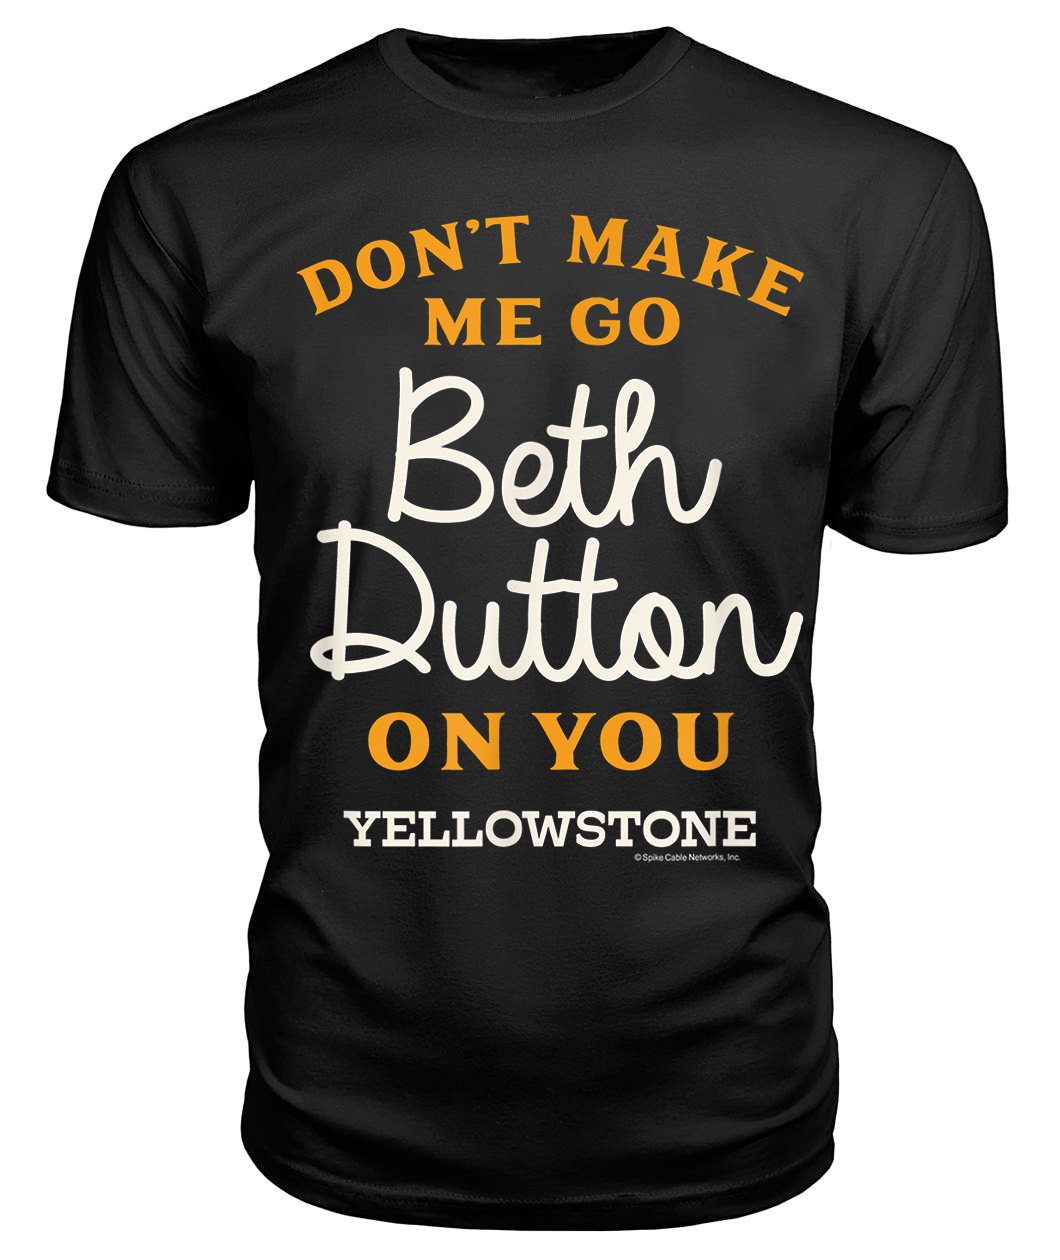 Yellowstone Don't Make Me Go Beth Dutton T-shirt Full Size Up To 5xl